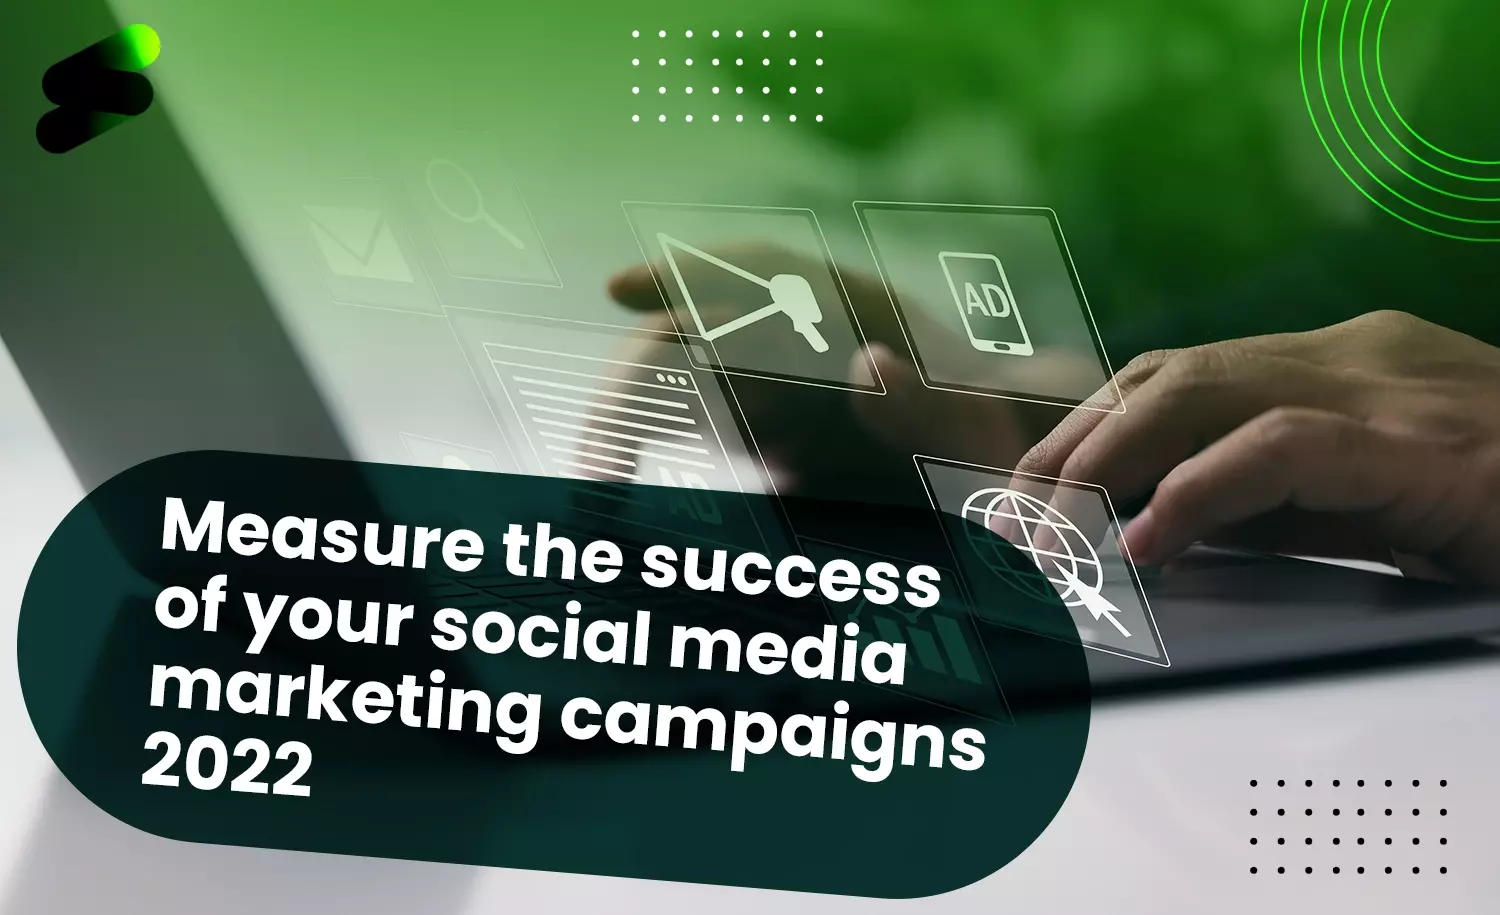 How to measure the success of your social media marketing campaigns 2022